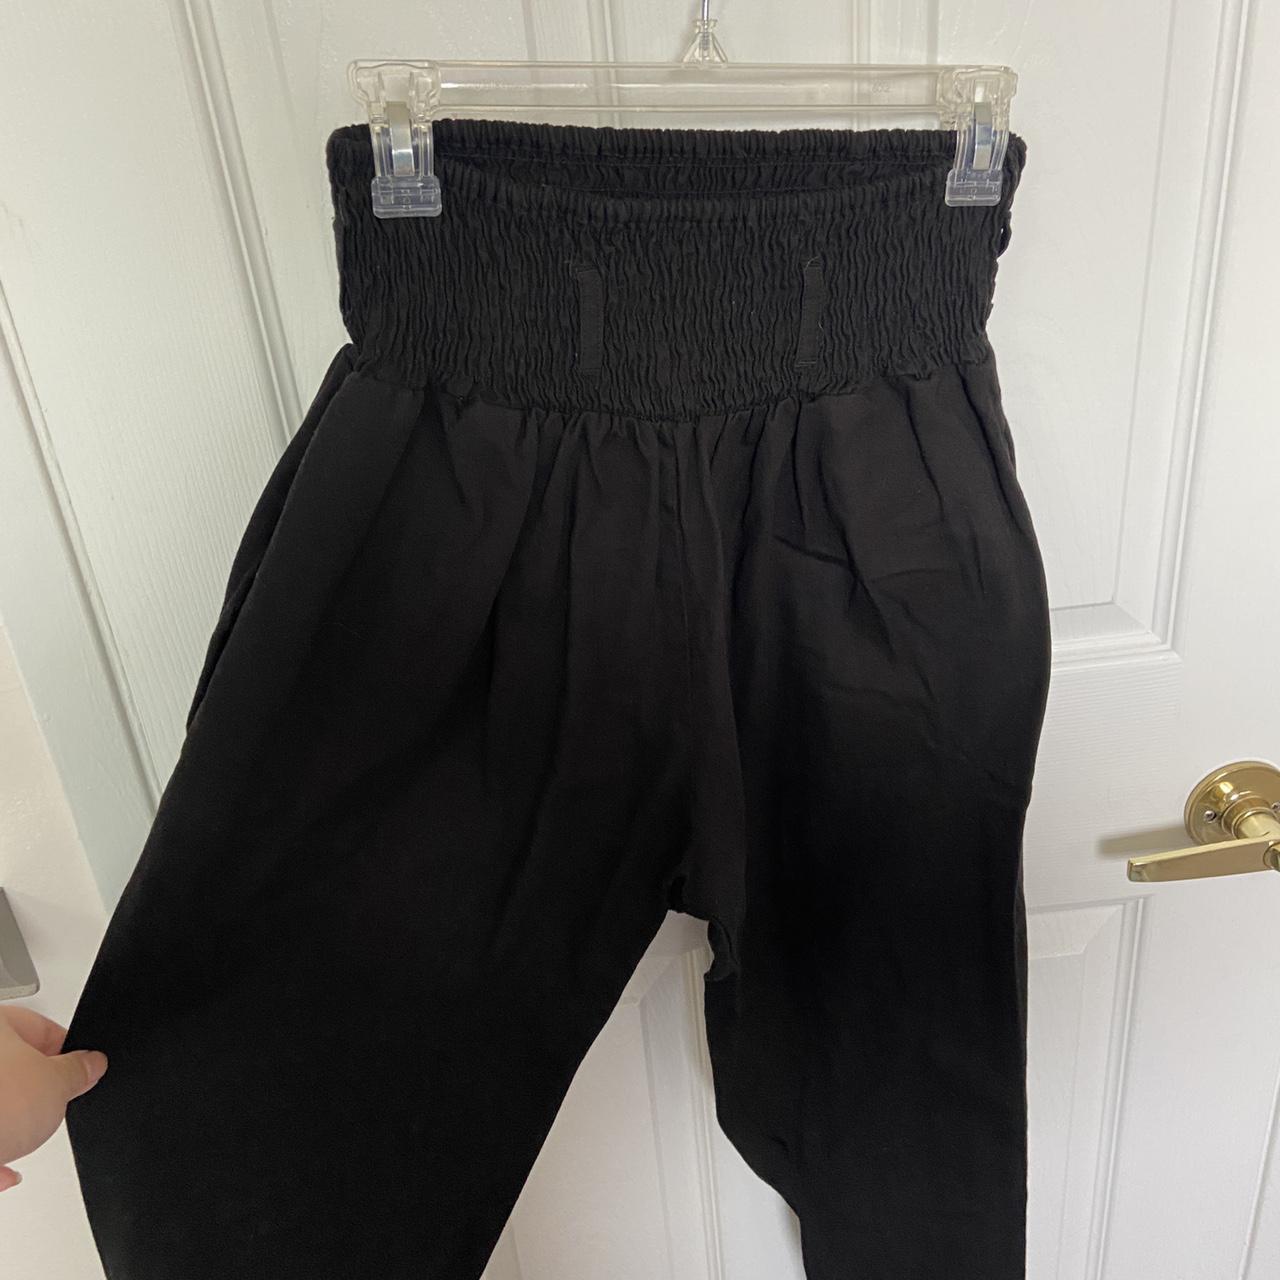 LUCY AND YAK ‘ALEXA’ TROUSERS - MIDNIGHT... - Depop